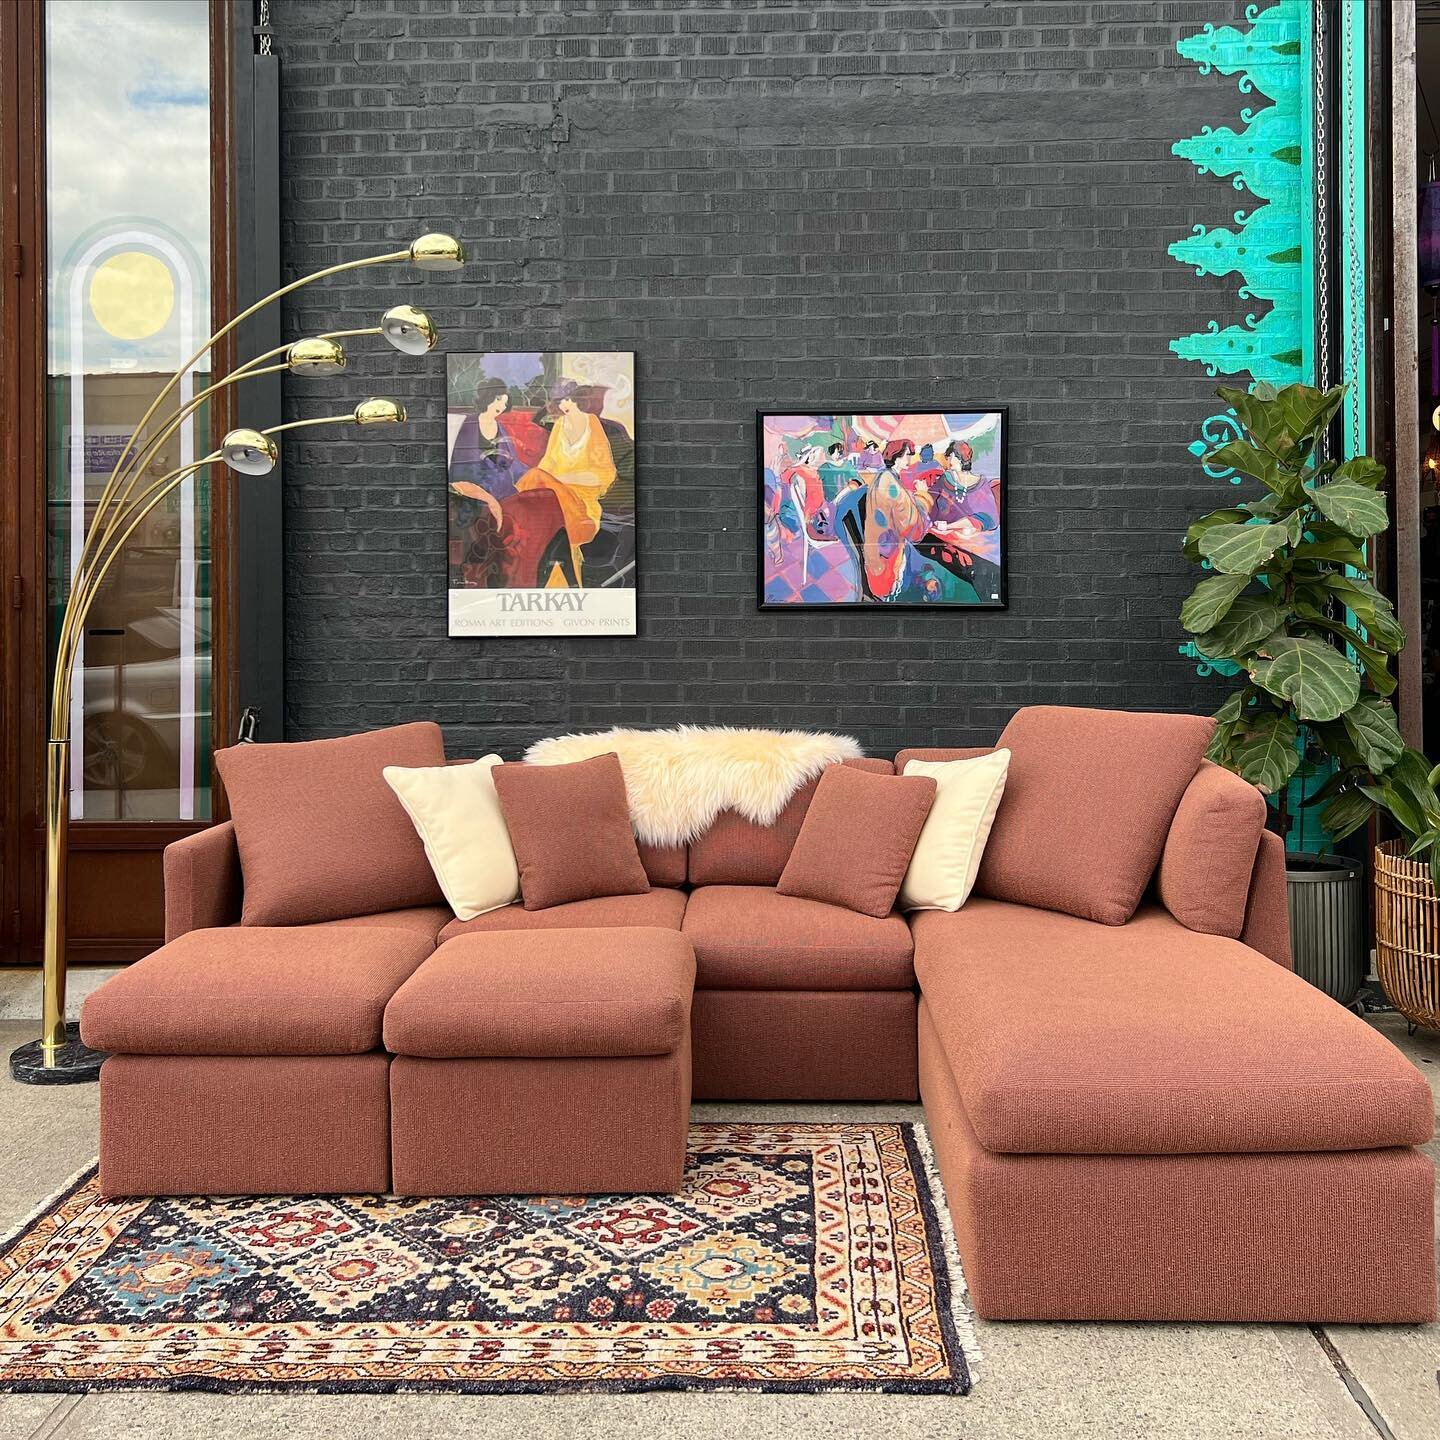 The comfiest sectional on the block!

Milo Baughman Sleeper Sectional - SOLD

Persian Rug $225
(75&rdquo; x 46.5&rdquo;)

Isaac Maimon Framed Print $125 
(25&rdquo; x 31.5&rdquo;)

Tarkay Framed Print - SOLD

Tree Lamp - SOLD 

Fiddle Leaf Tree $150
